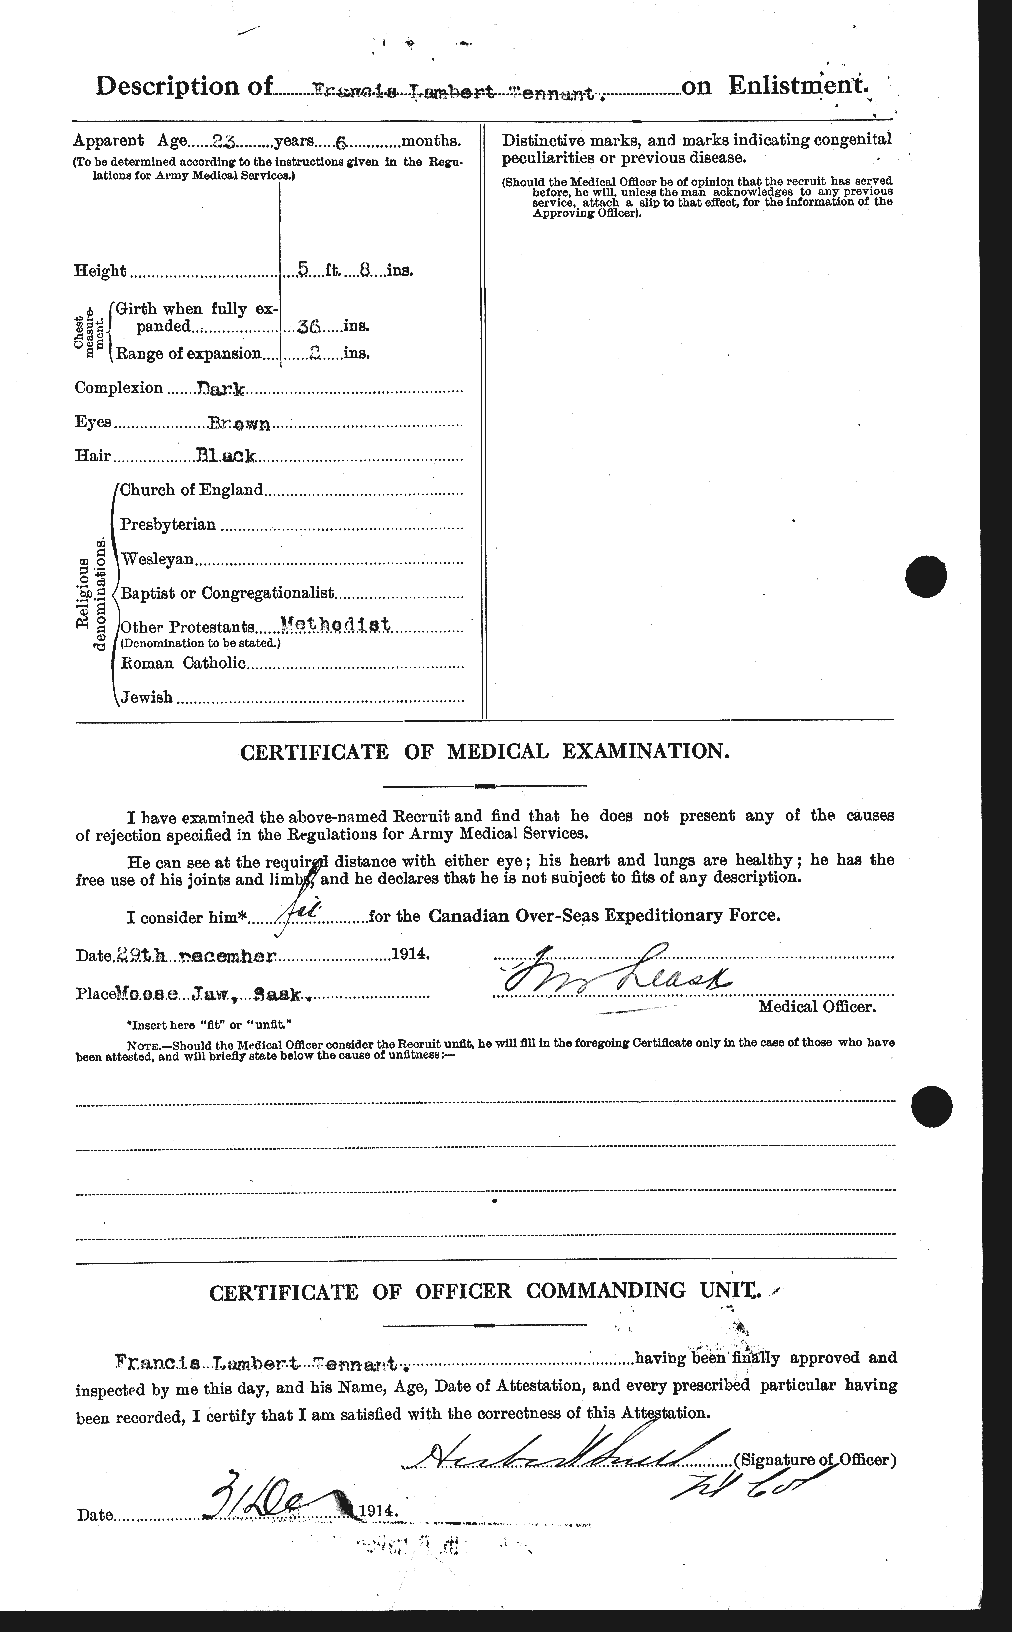 Personnel Records of the First World War - CEF 627851b